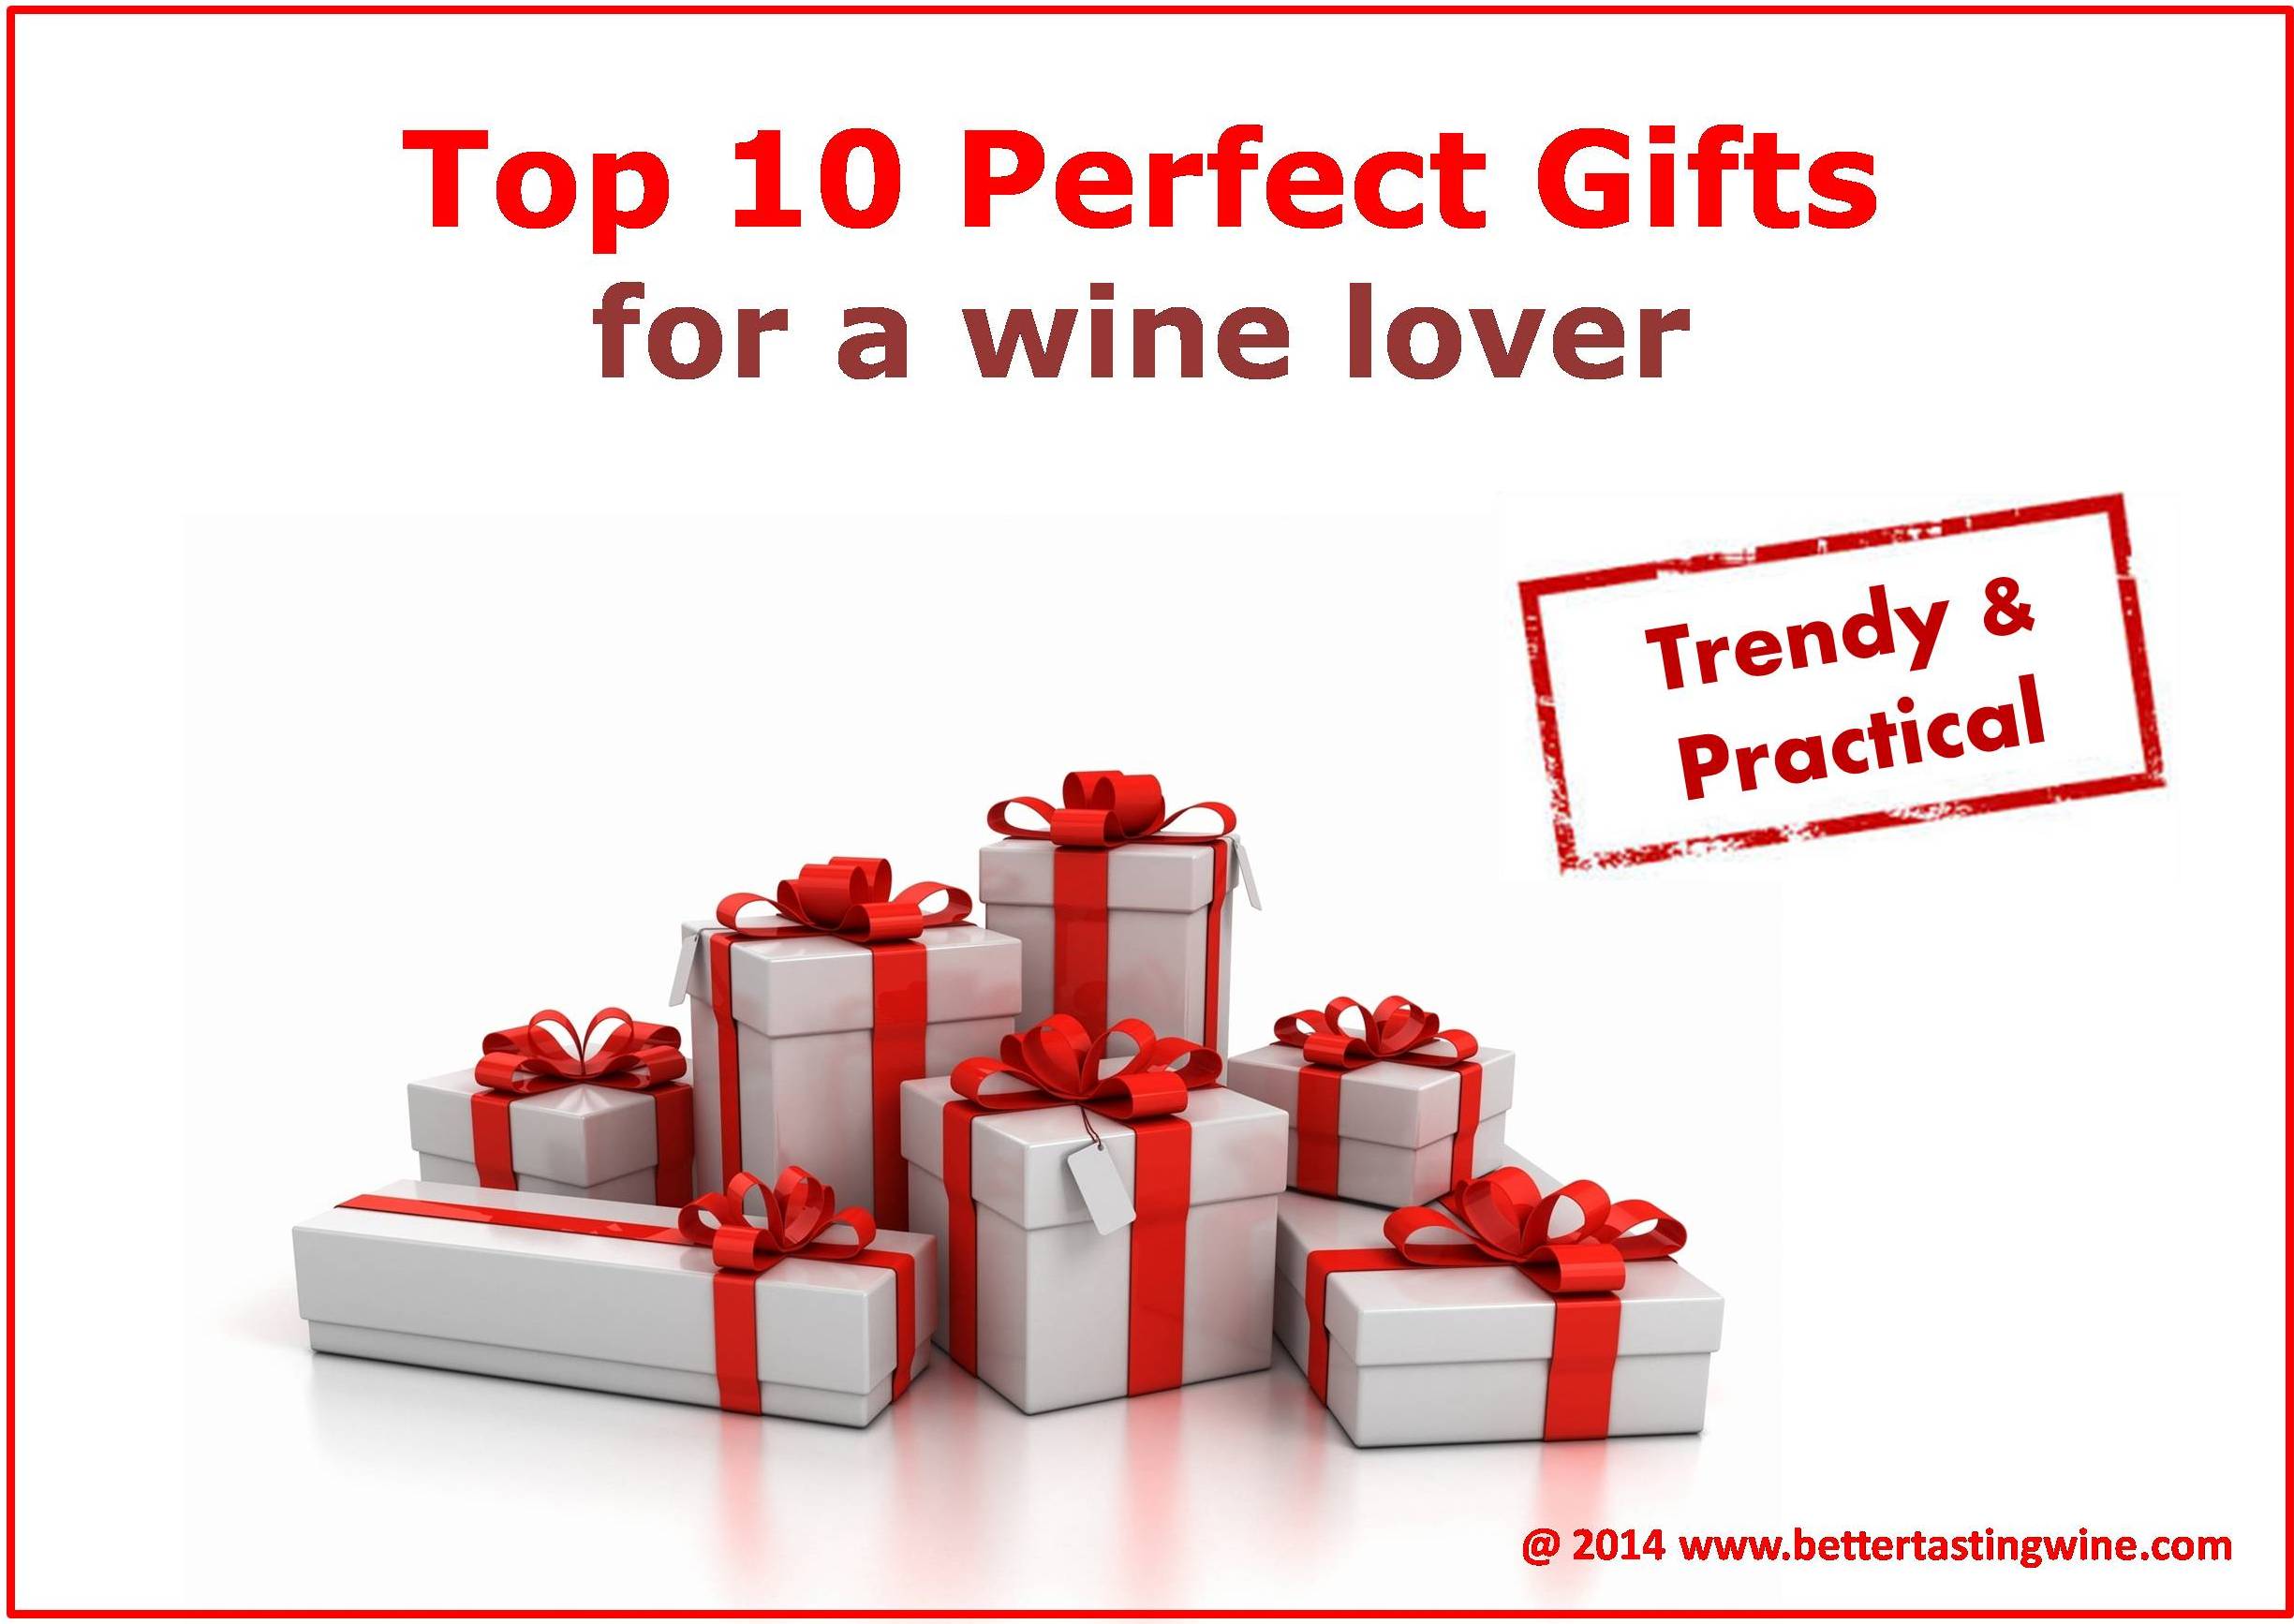 Top Ten Must-Have Wine Gifts for Wine Lovers